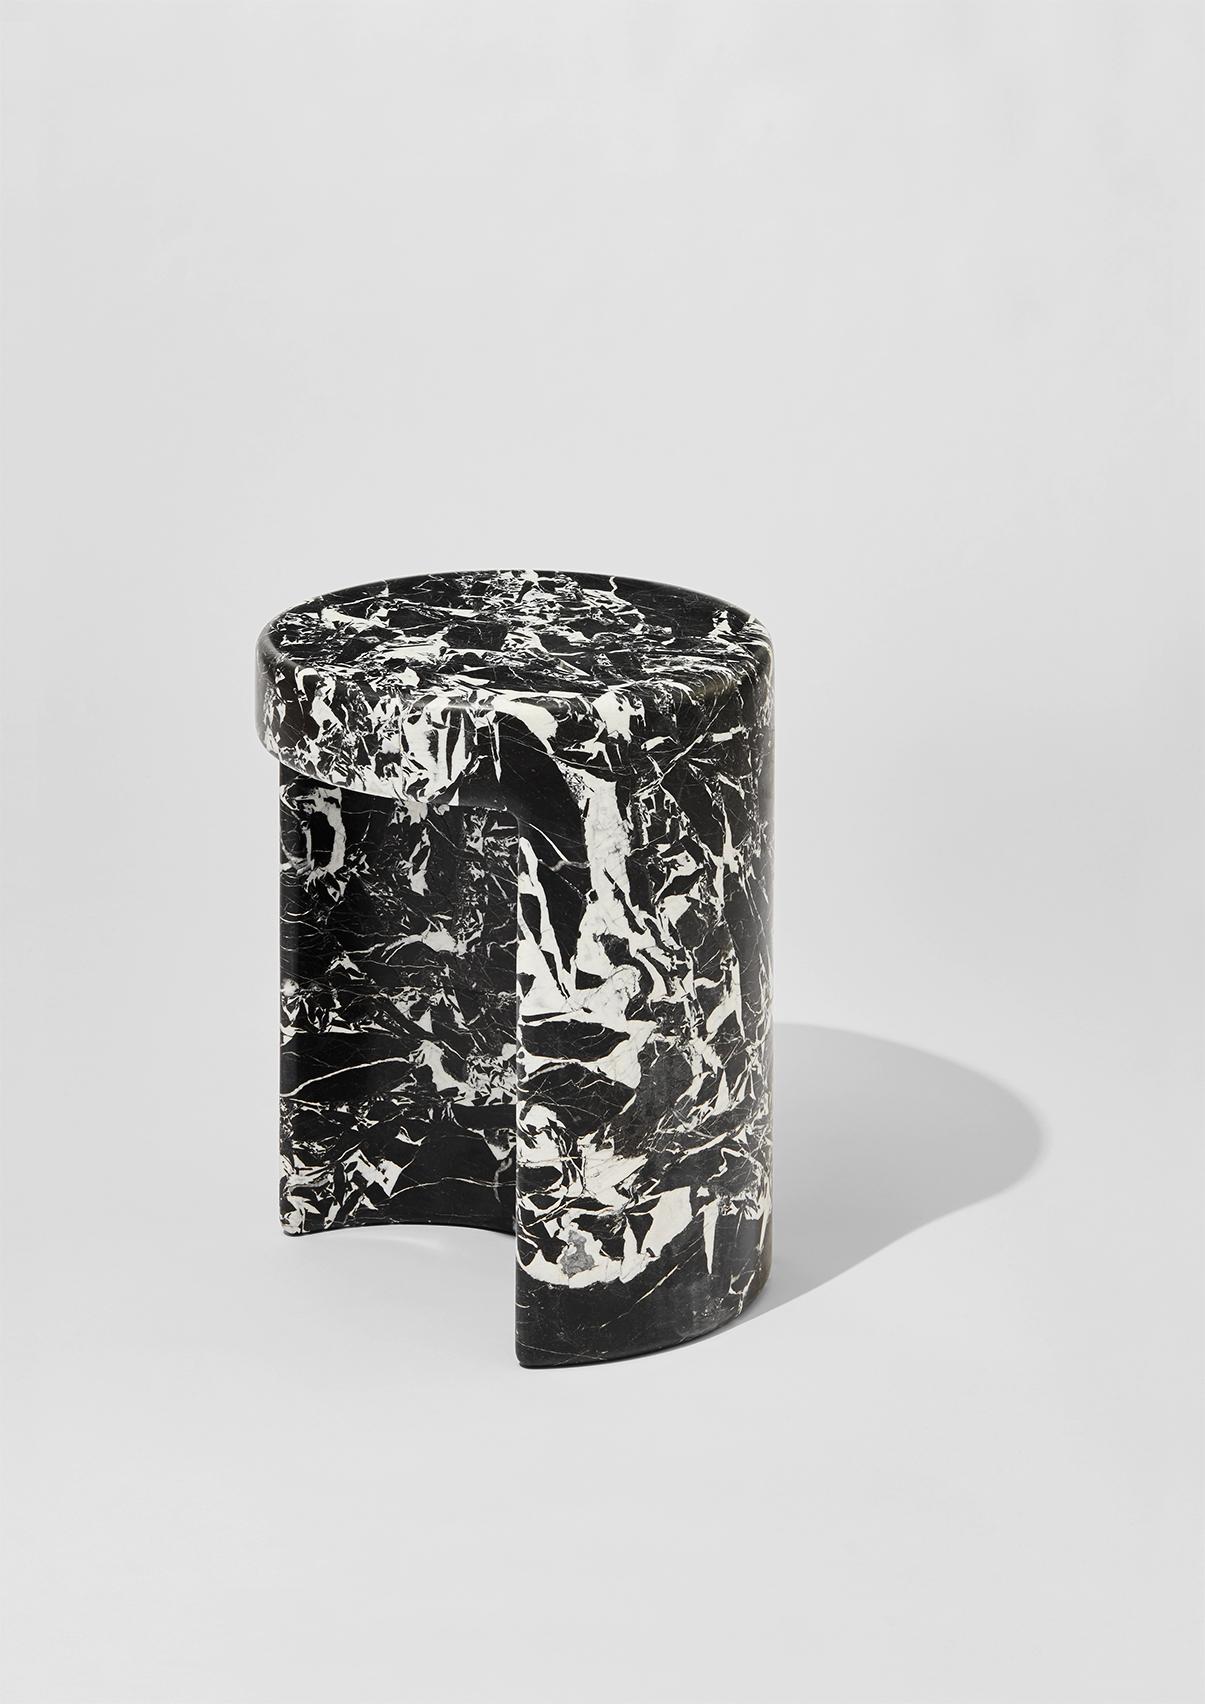 Marble side tables Métaphore designed by Hervé Langlais for Galerie Negropontes in Paris, France. 

Hervé Langlais is a graduate of the Normandy School of Architecture in Rouen. He collaborated with Paul Andreu for over fifteen years, working on the